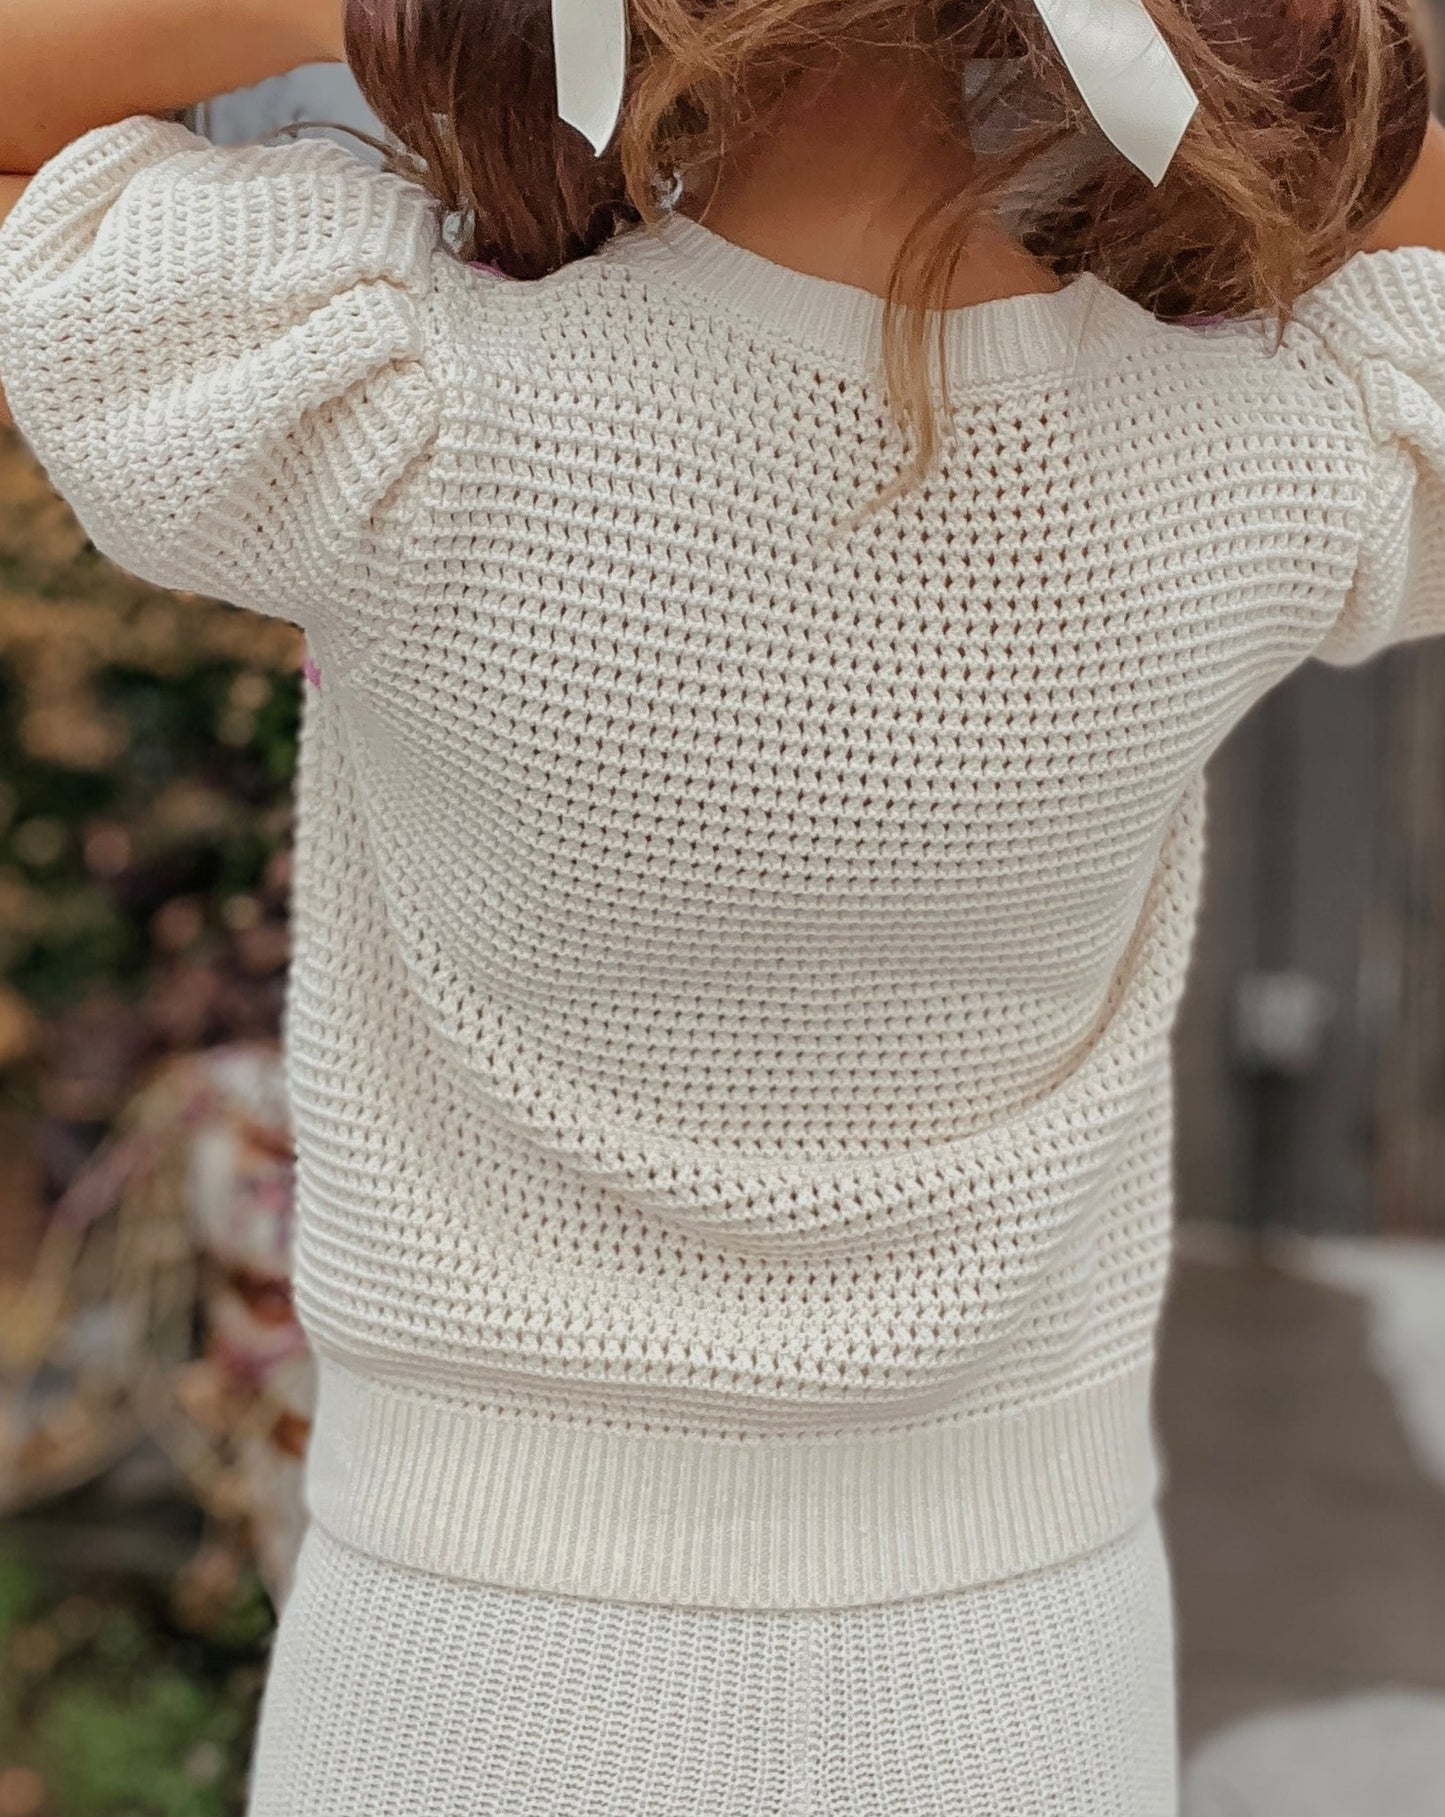 Casey Embroidery Heart Knit Puff Sleeve Sweater Top